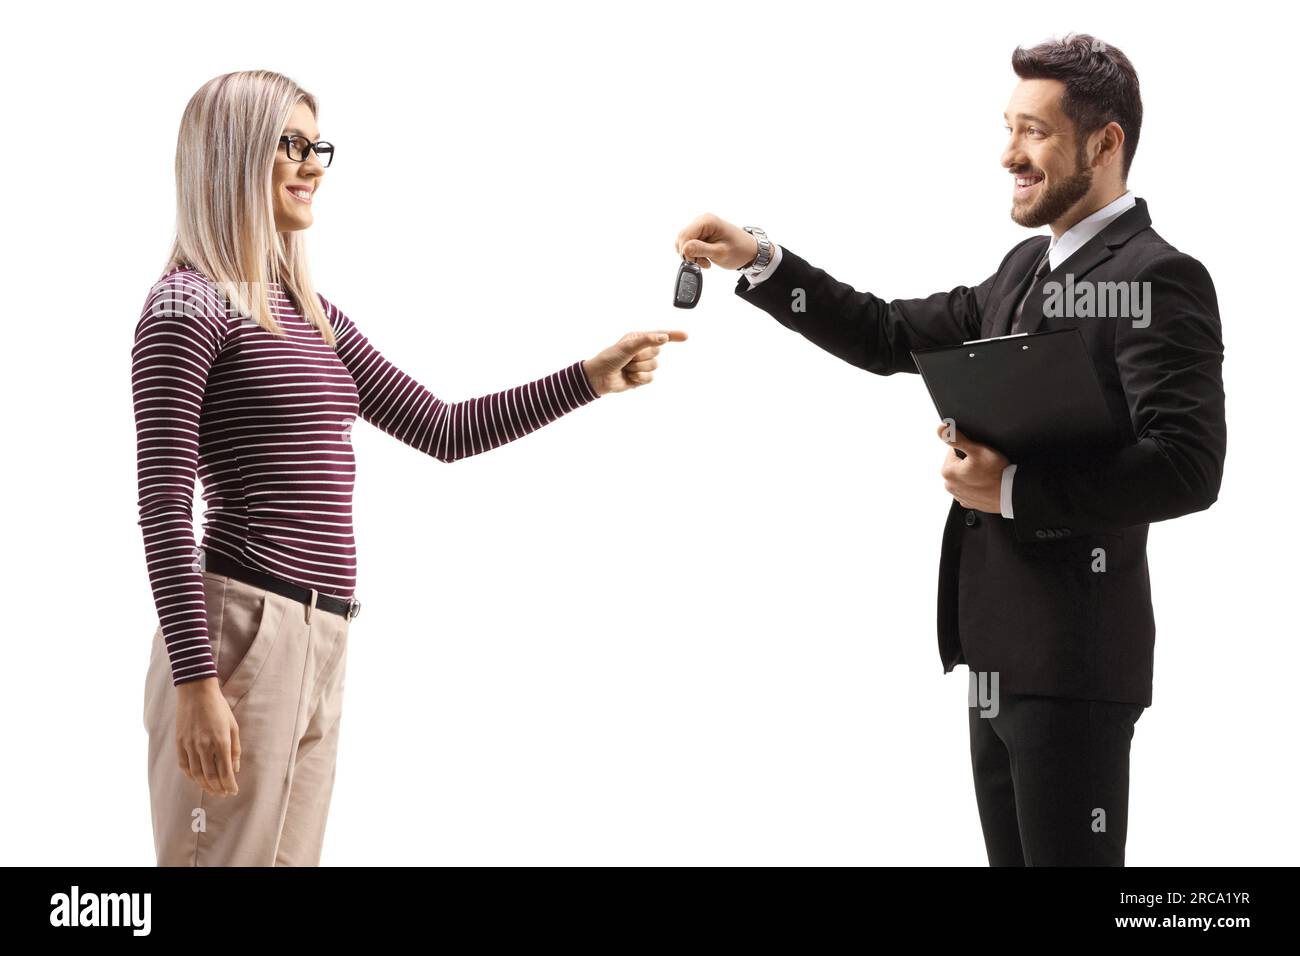 Businessman giving car keys to a young woman isolated on white background Stock Photo